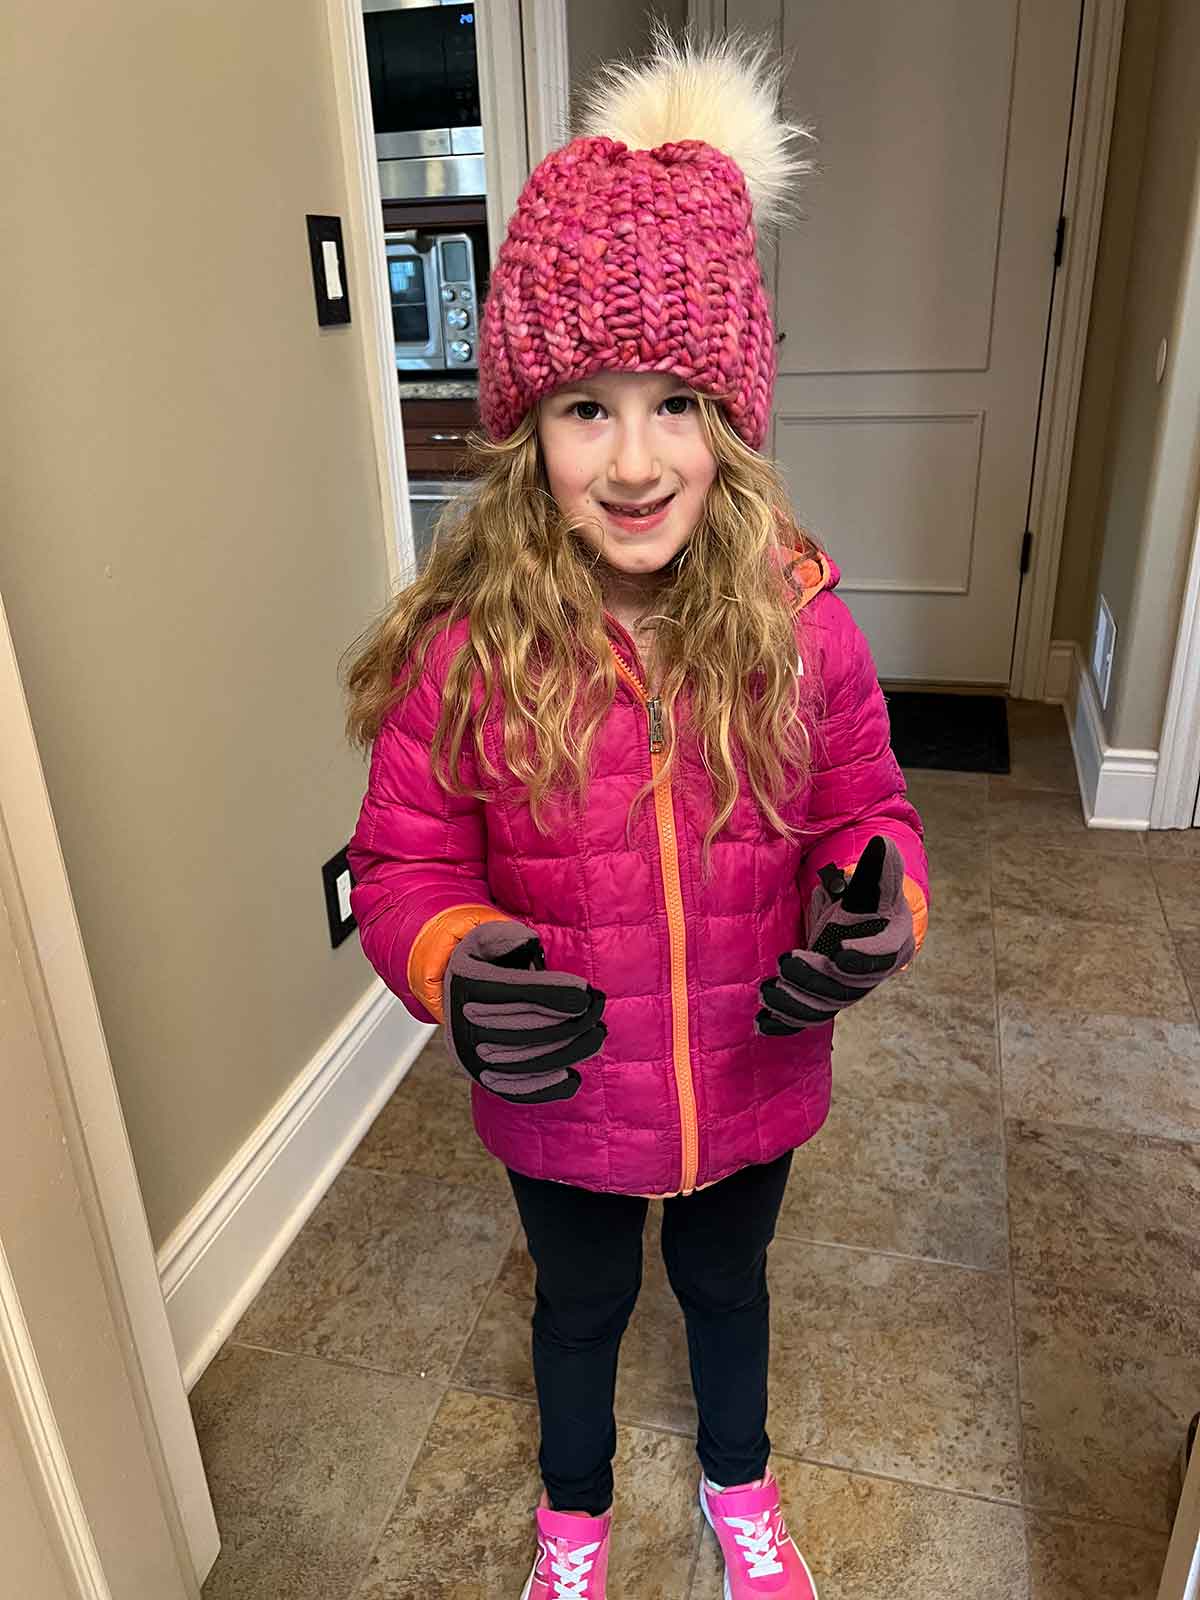 Little girl with curly blonde hair in a pink winter jackets, pink hat, and gloves.